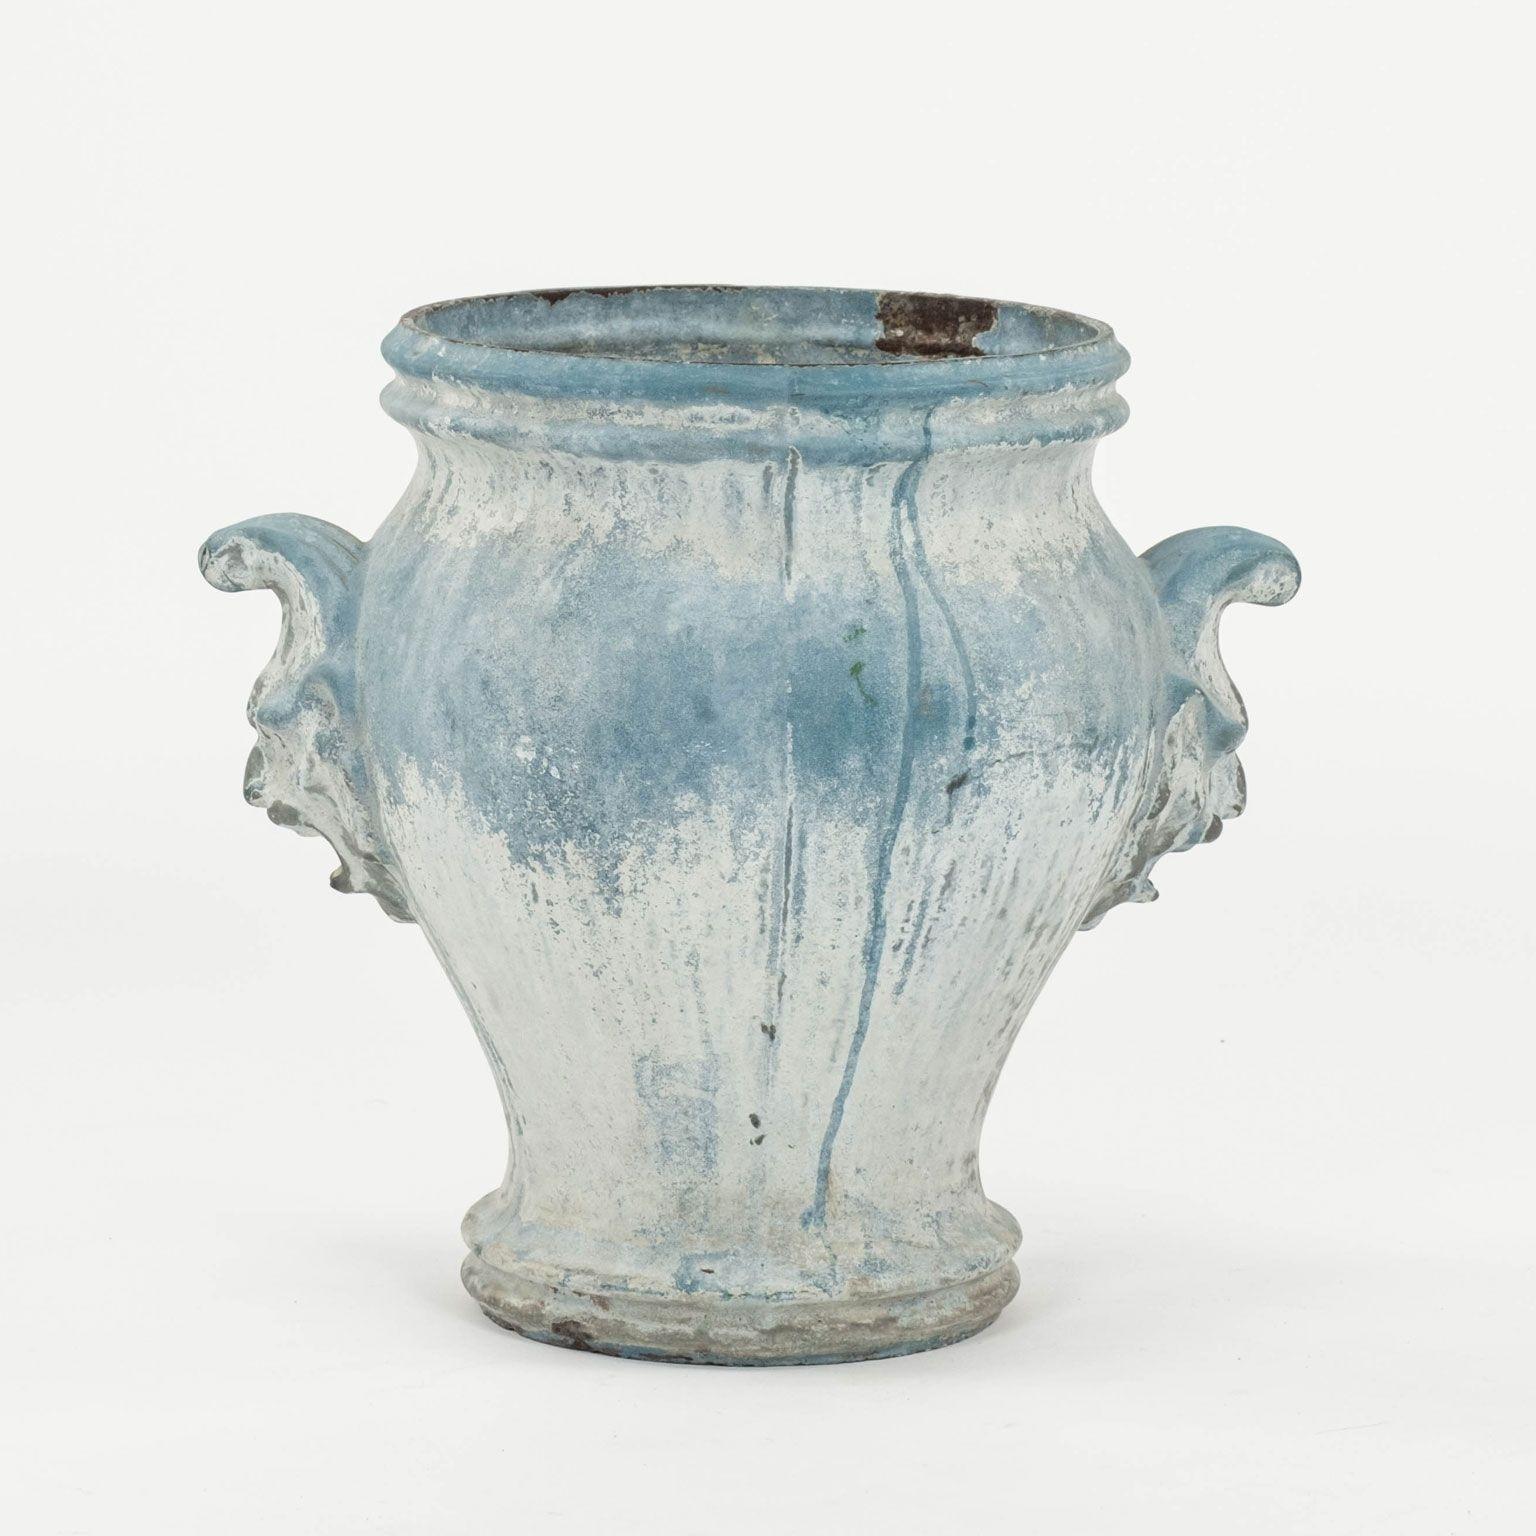 Late 19th century faded blue-color enamel cast iron urn with jester-faced mask handles. Heavy, fine quality cast iron. Made by E. Paris, marked 